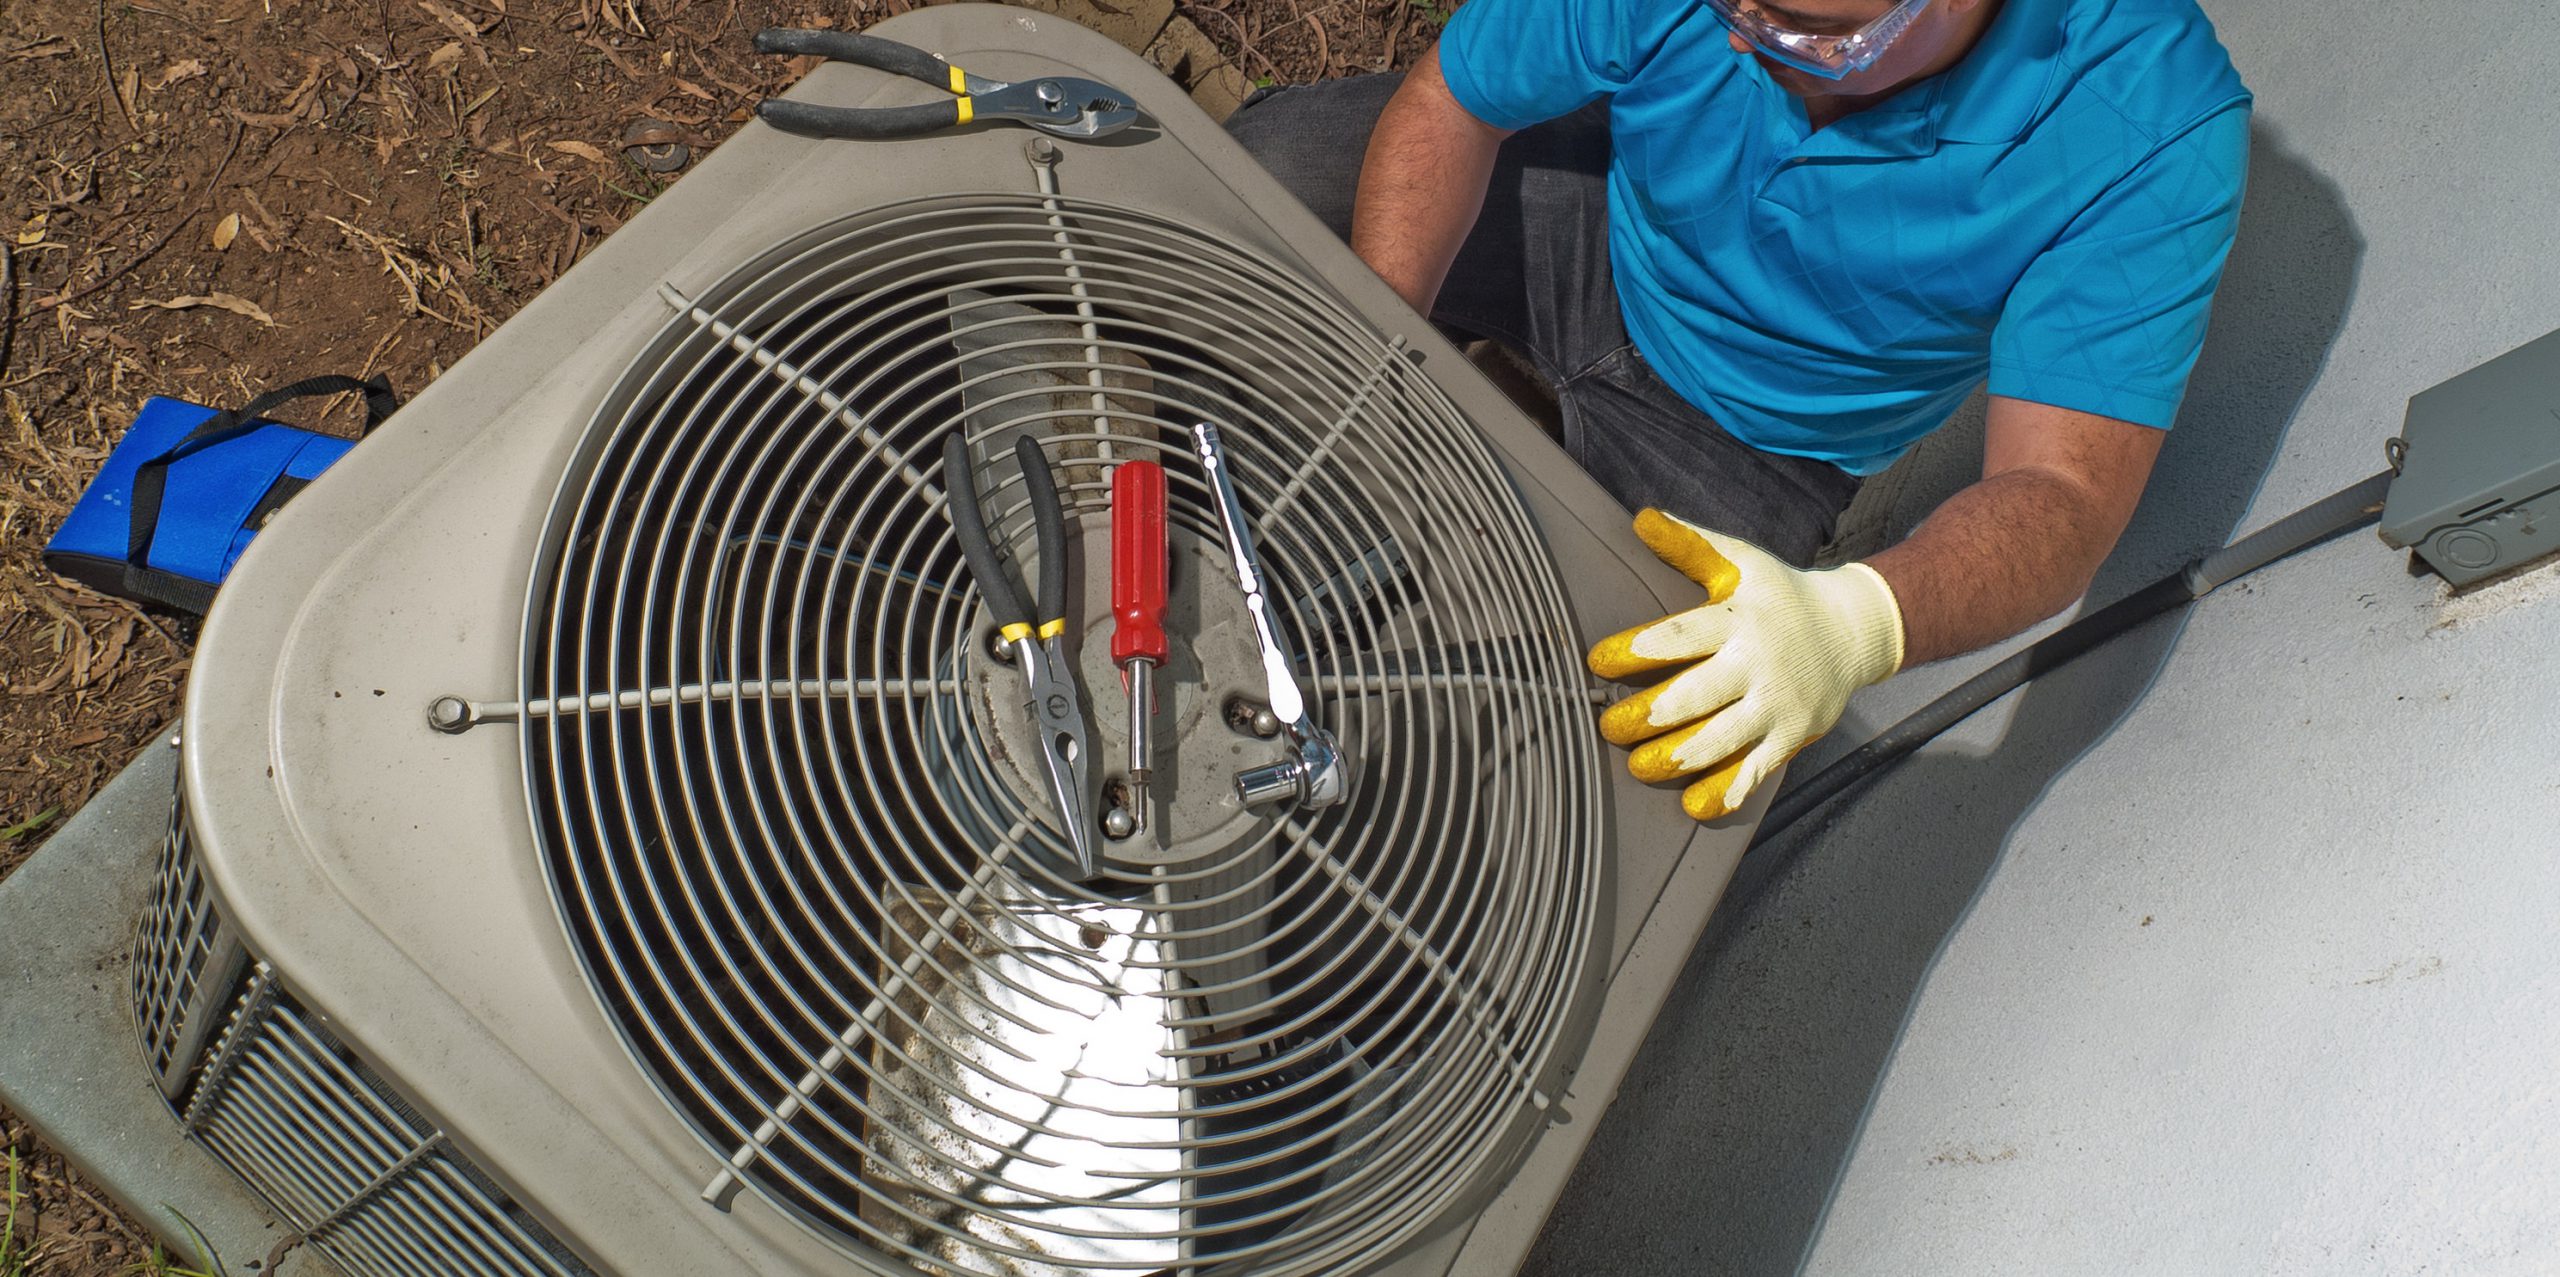 Factors Which are Important While Replacing an AC Unit